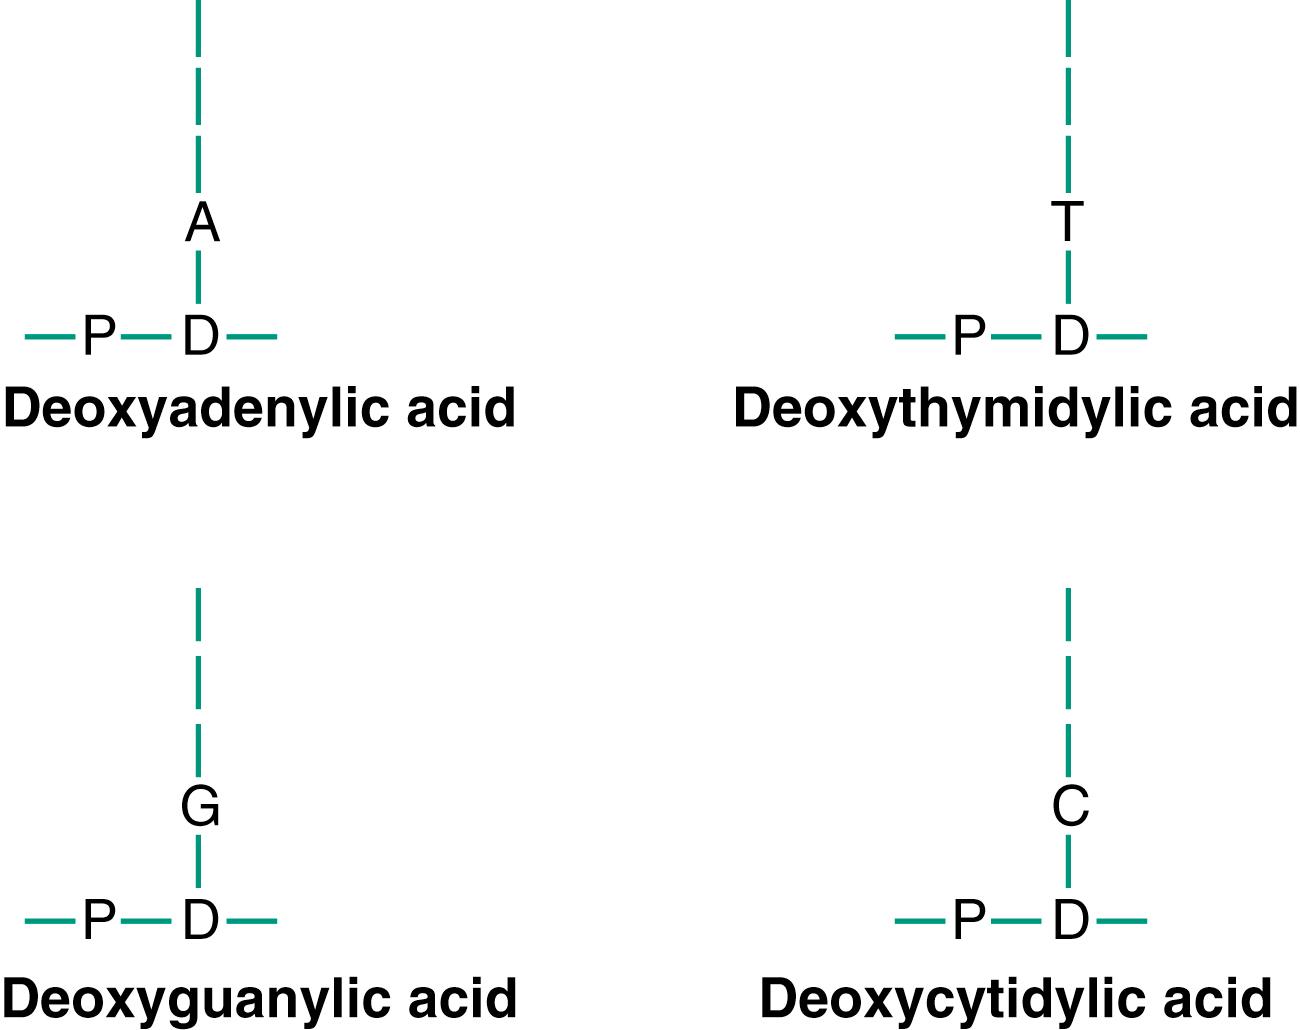 Figure 3-5., Symbols for the four nucleotides that combine to form DNA. Each nucleotide contains phosphoric acid (P), deoxyribose (D), and one of the four nucleotide bases: adenine (A); thymine (T); guanine (G); or cytosine (C).